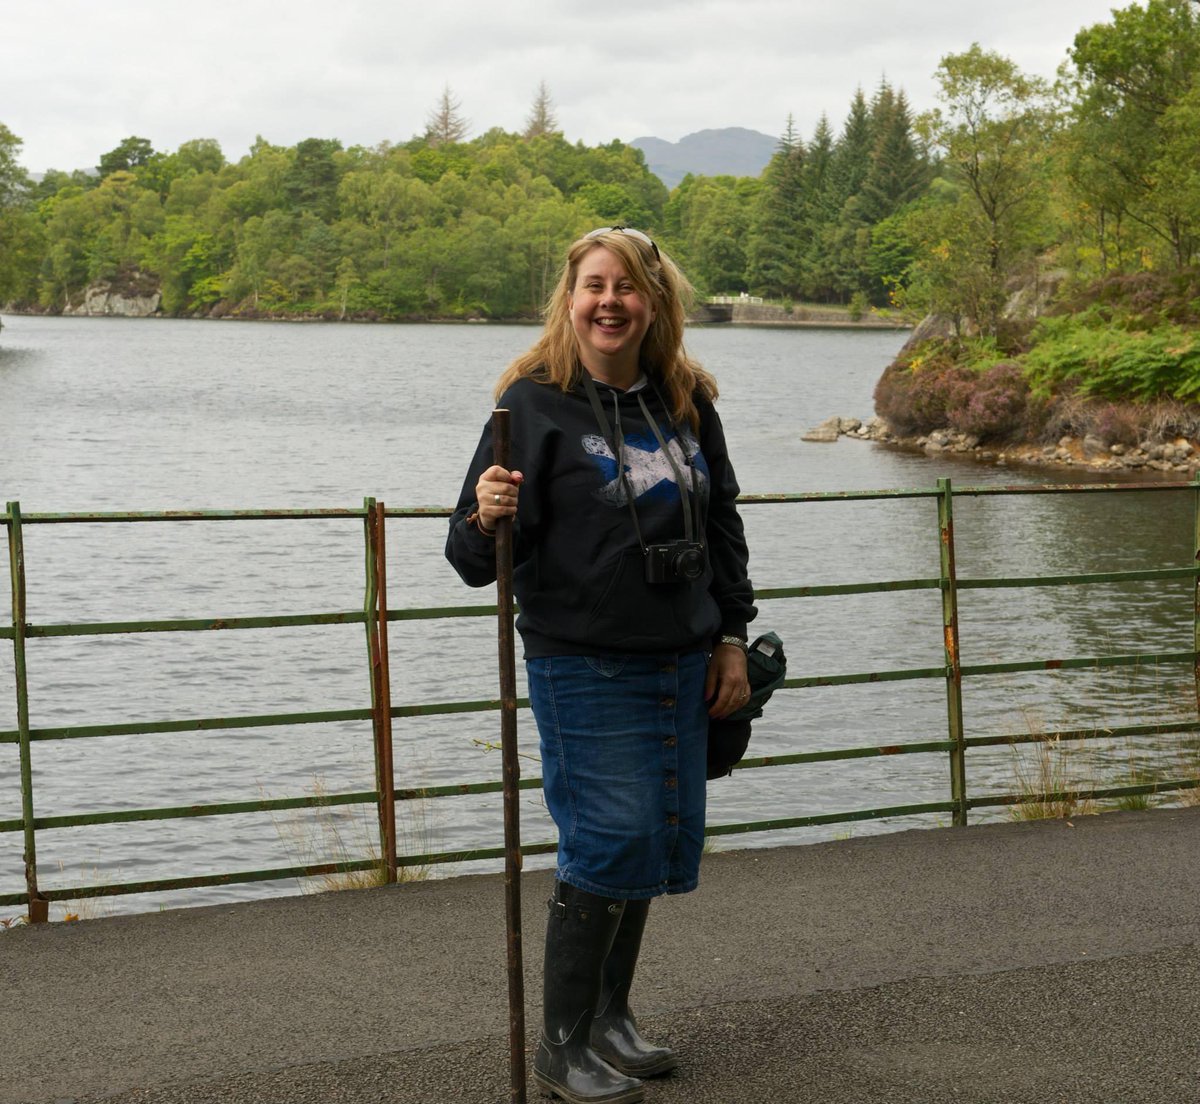 @EerieEdinburgh It was super. I’ve not been as far as Inveraray but here I am at Loch Katrine. I love the Trossachs had a couple of brilliant holidays based in Aberfoyle.